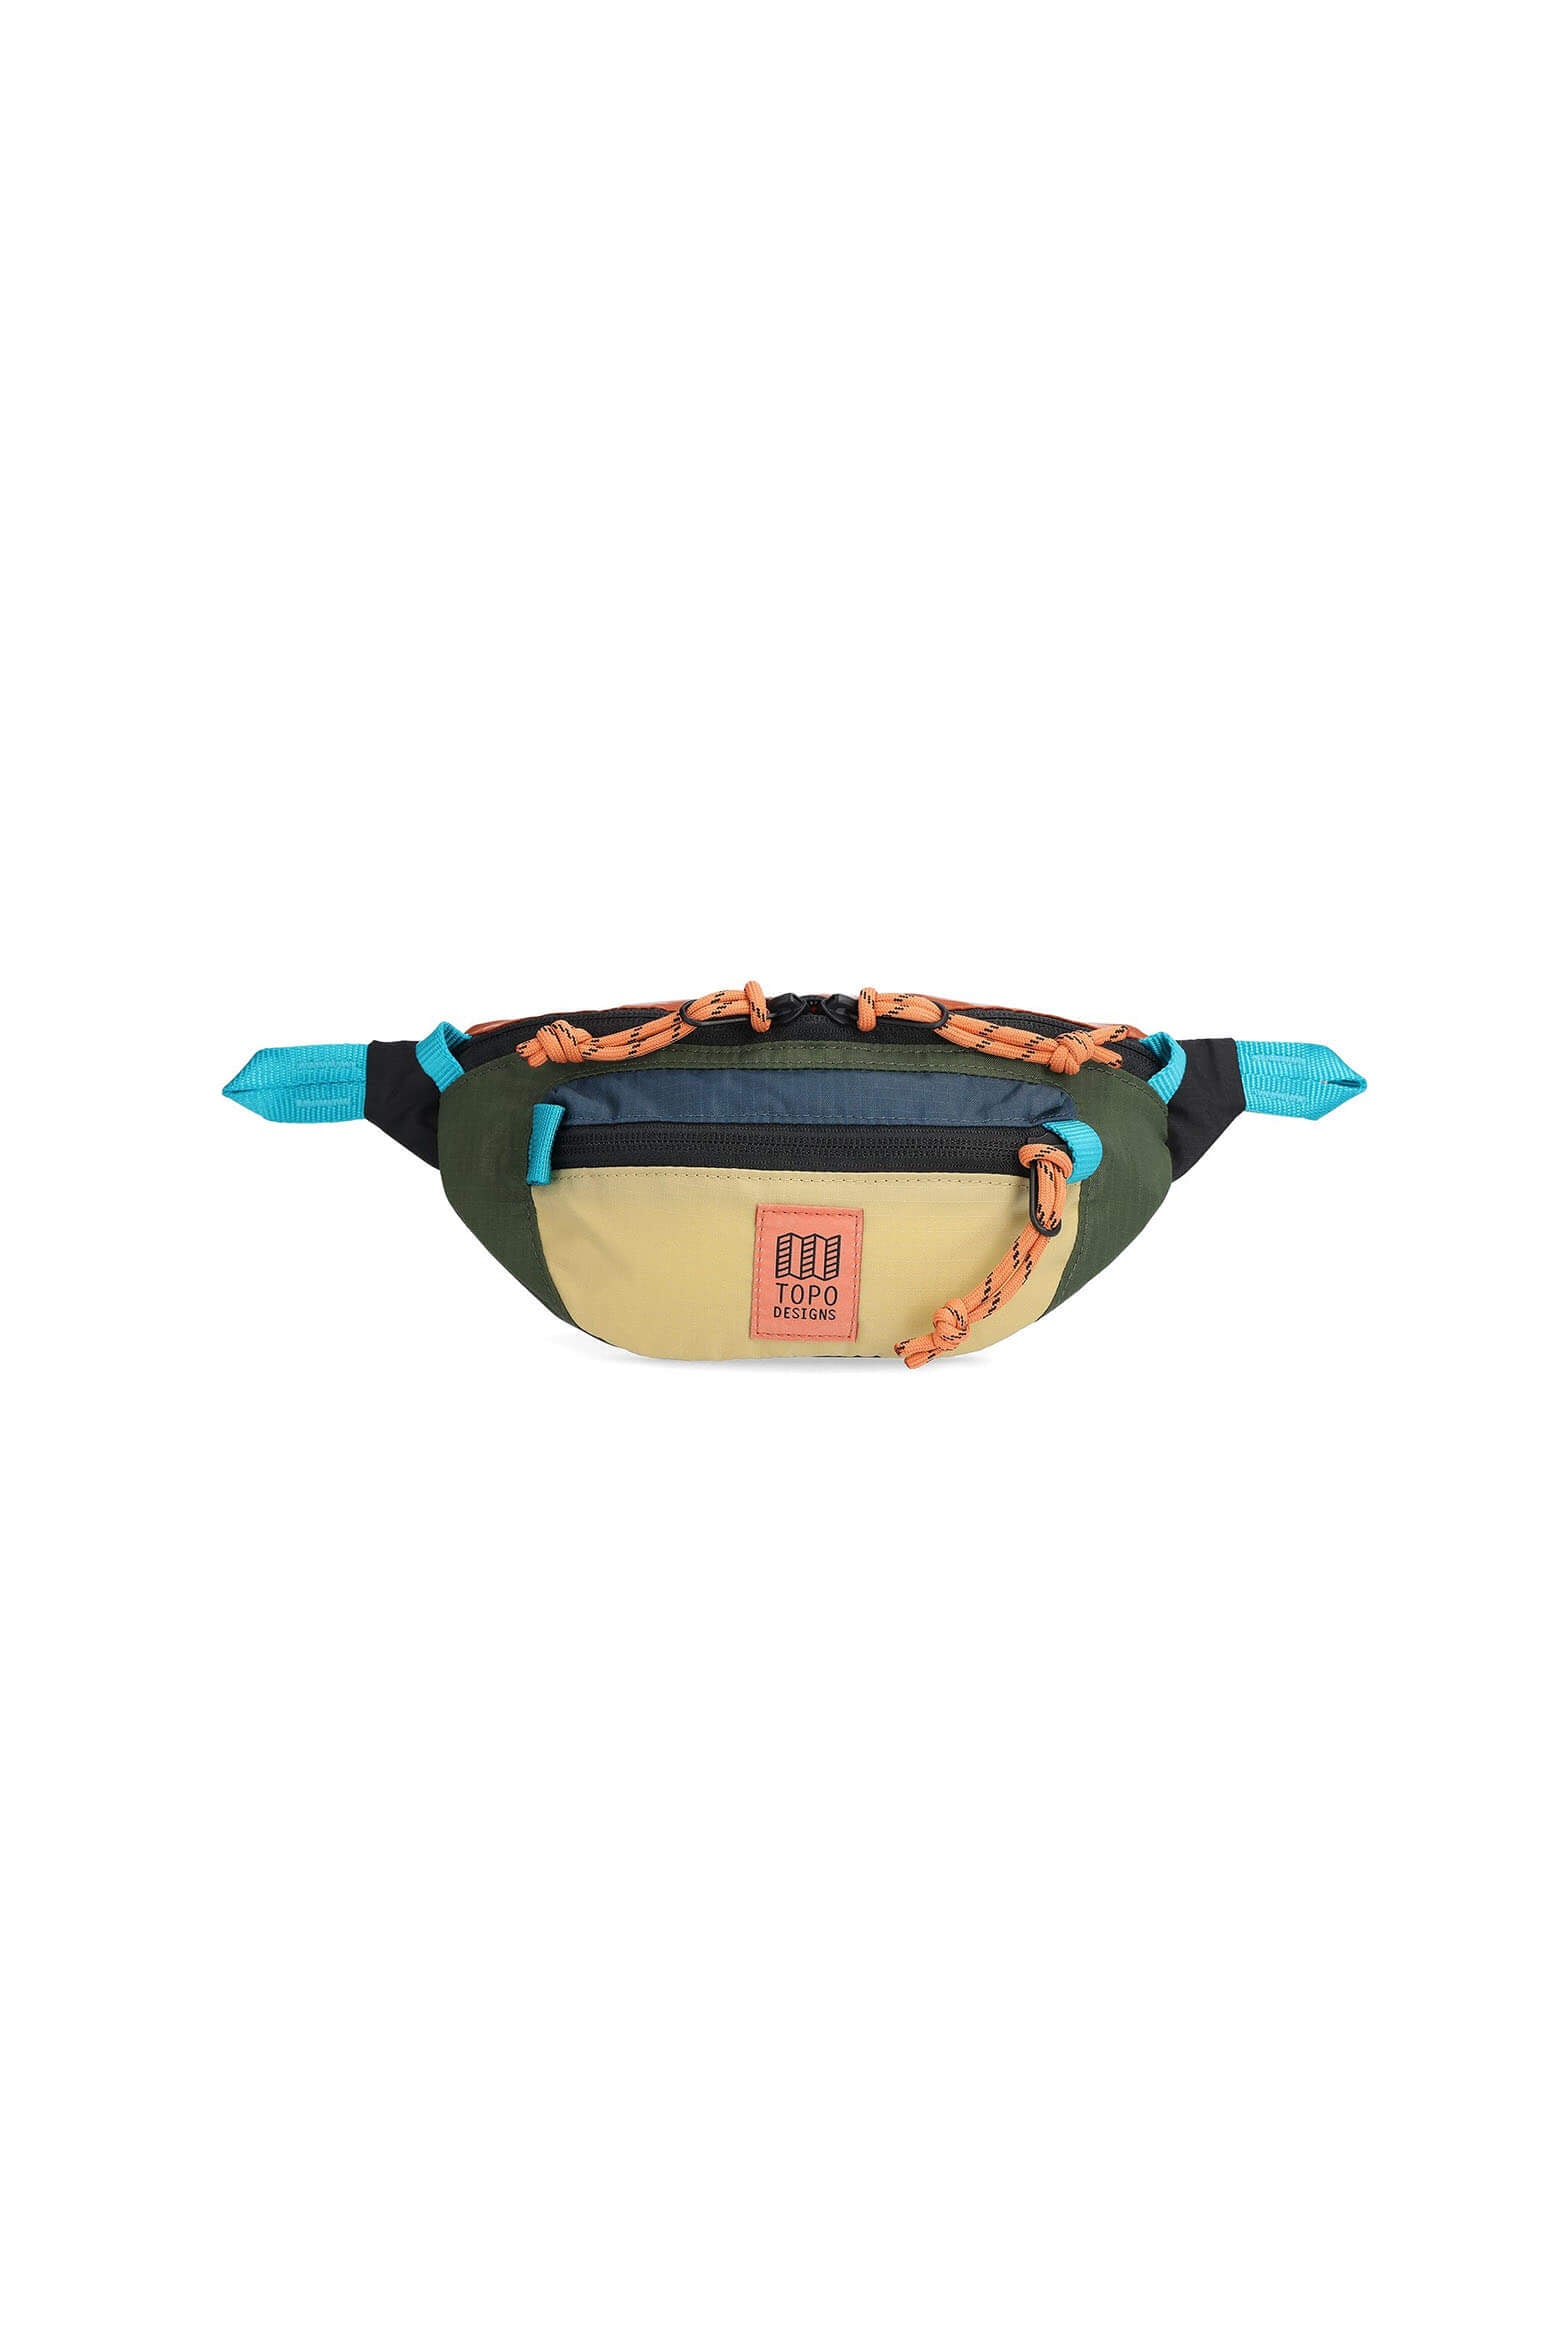 Topo Designs mountain waist pack in olive and hemp